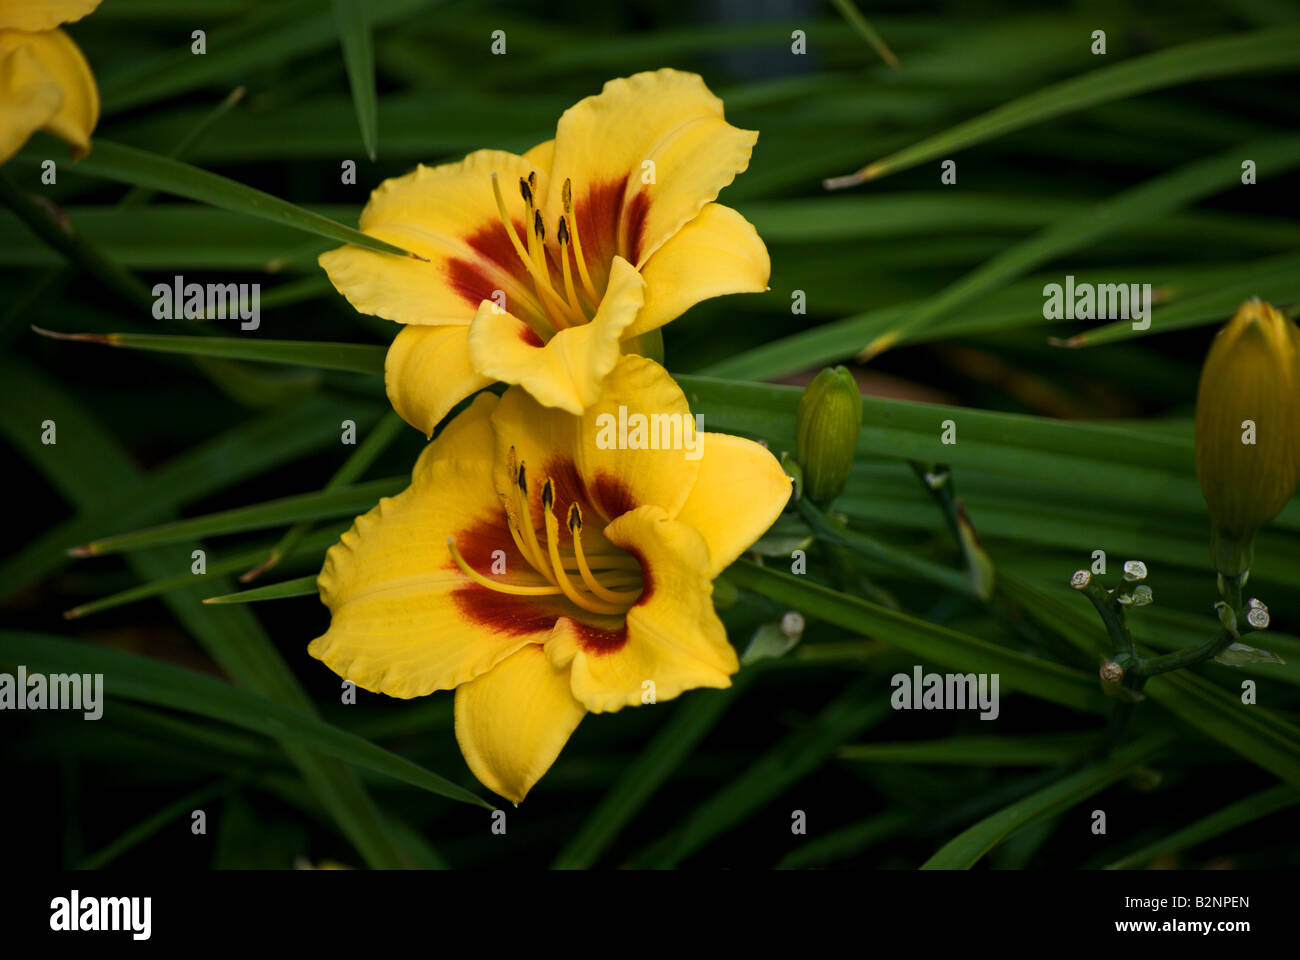 A pair blossoms of a Hemerocallis (Day Lily)  in bloom at Evologia Gardens Stock Photo